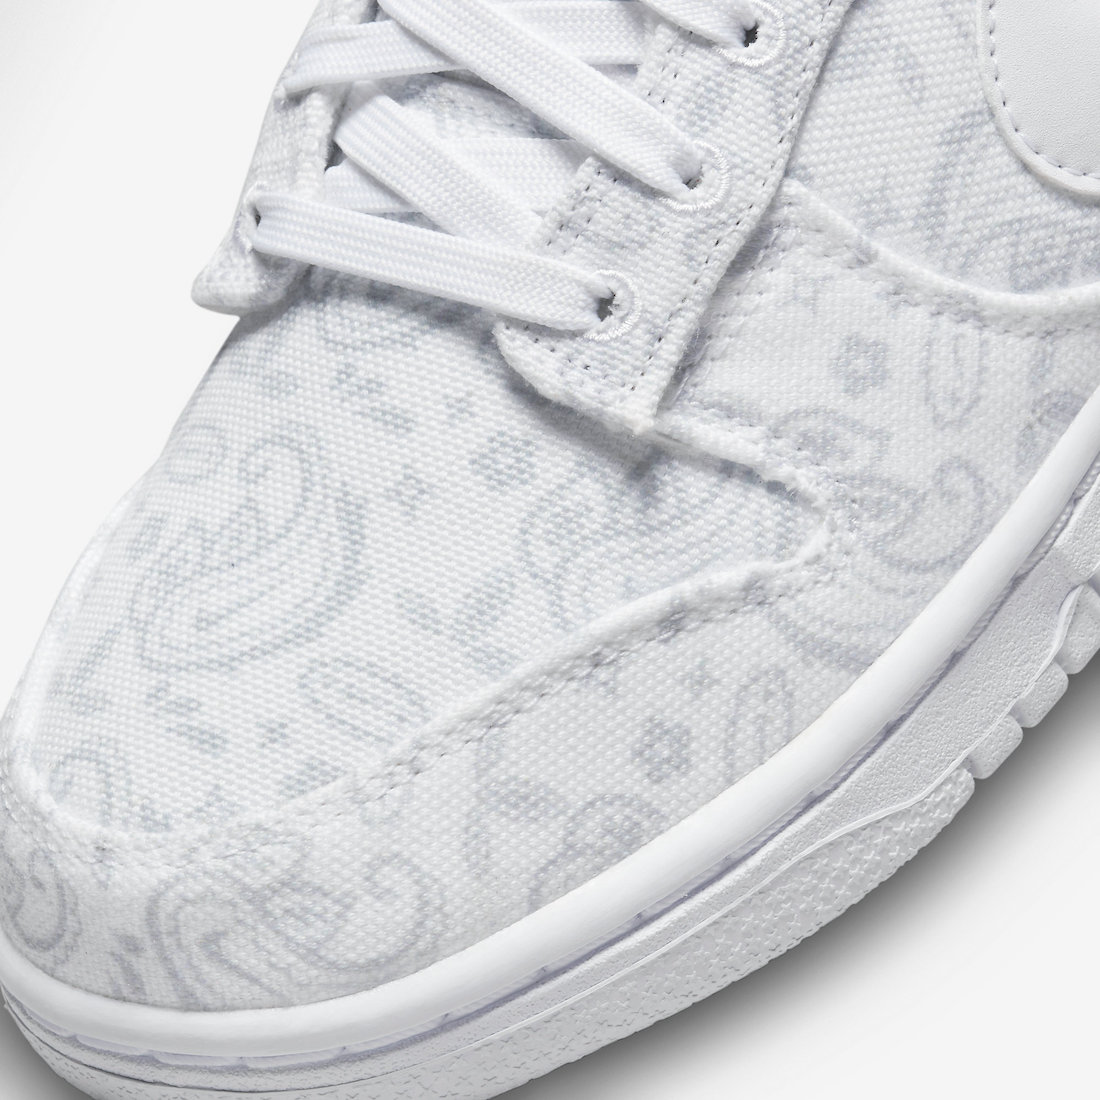 Nike Dunk Low White Paisley DJ9955-100 Release Date